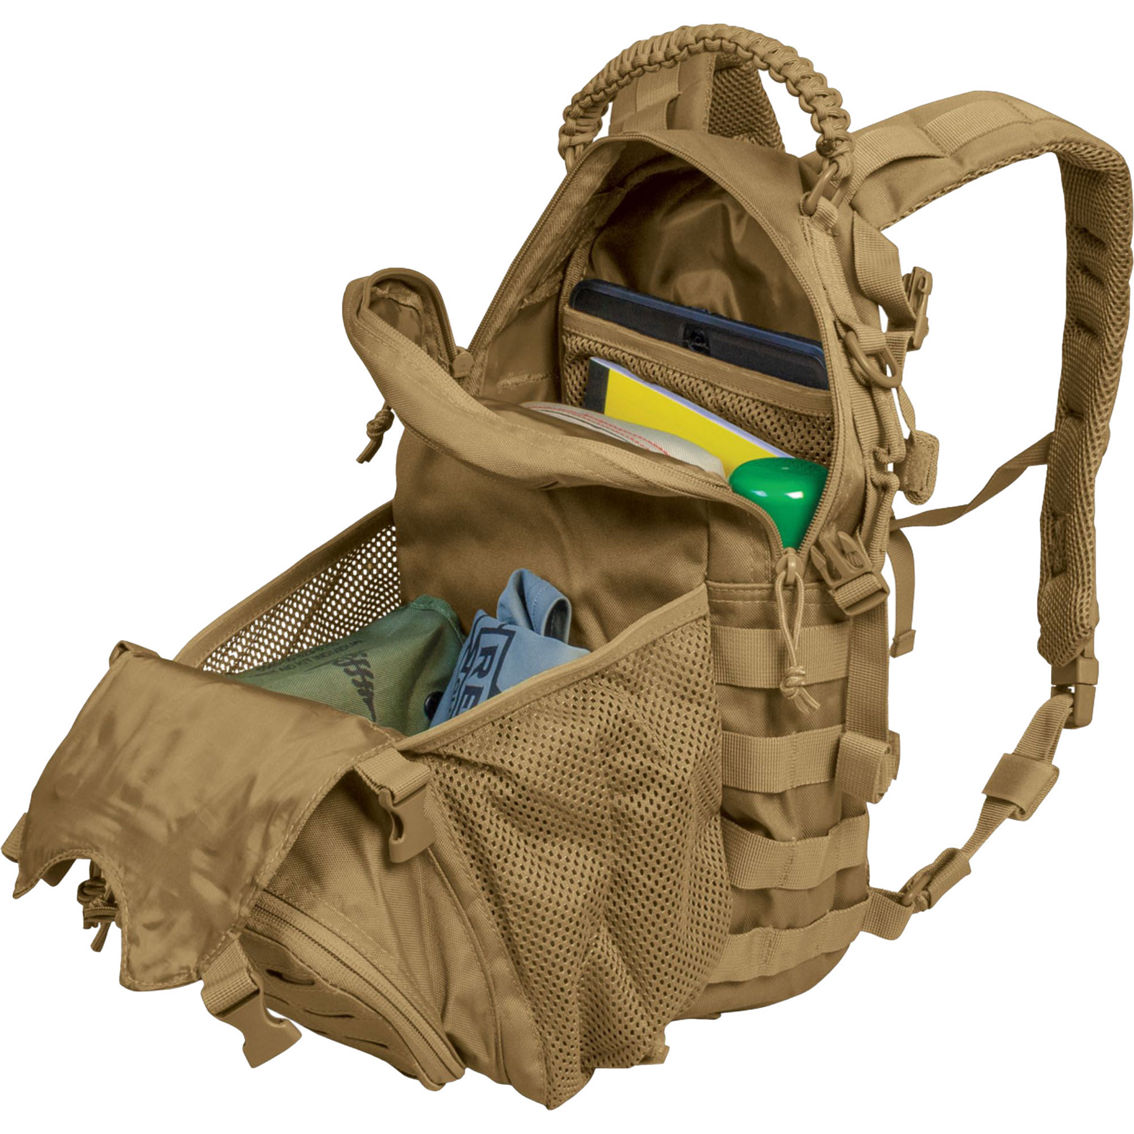 Red Rock Outdoor Gear Ambush Pack - Image 6 of 8